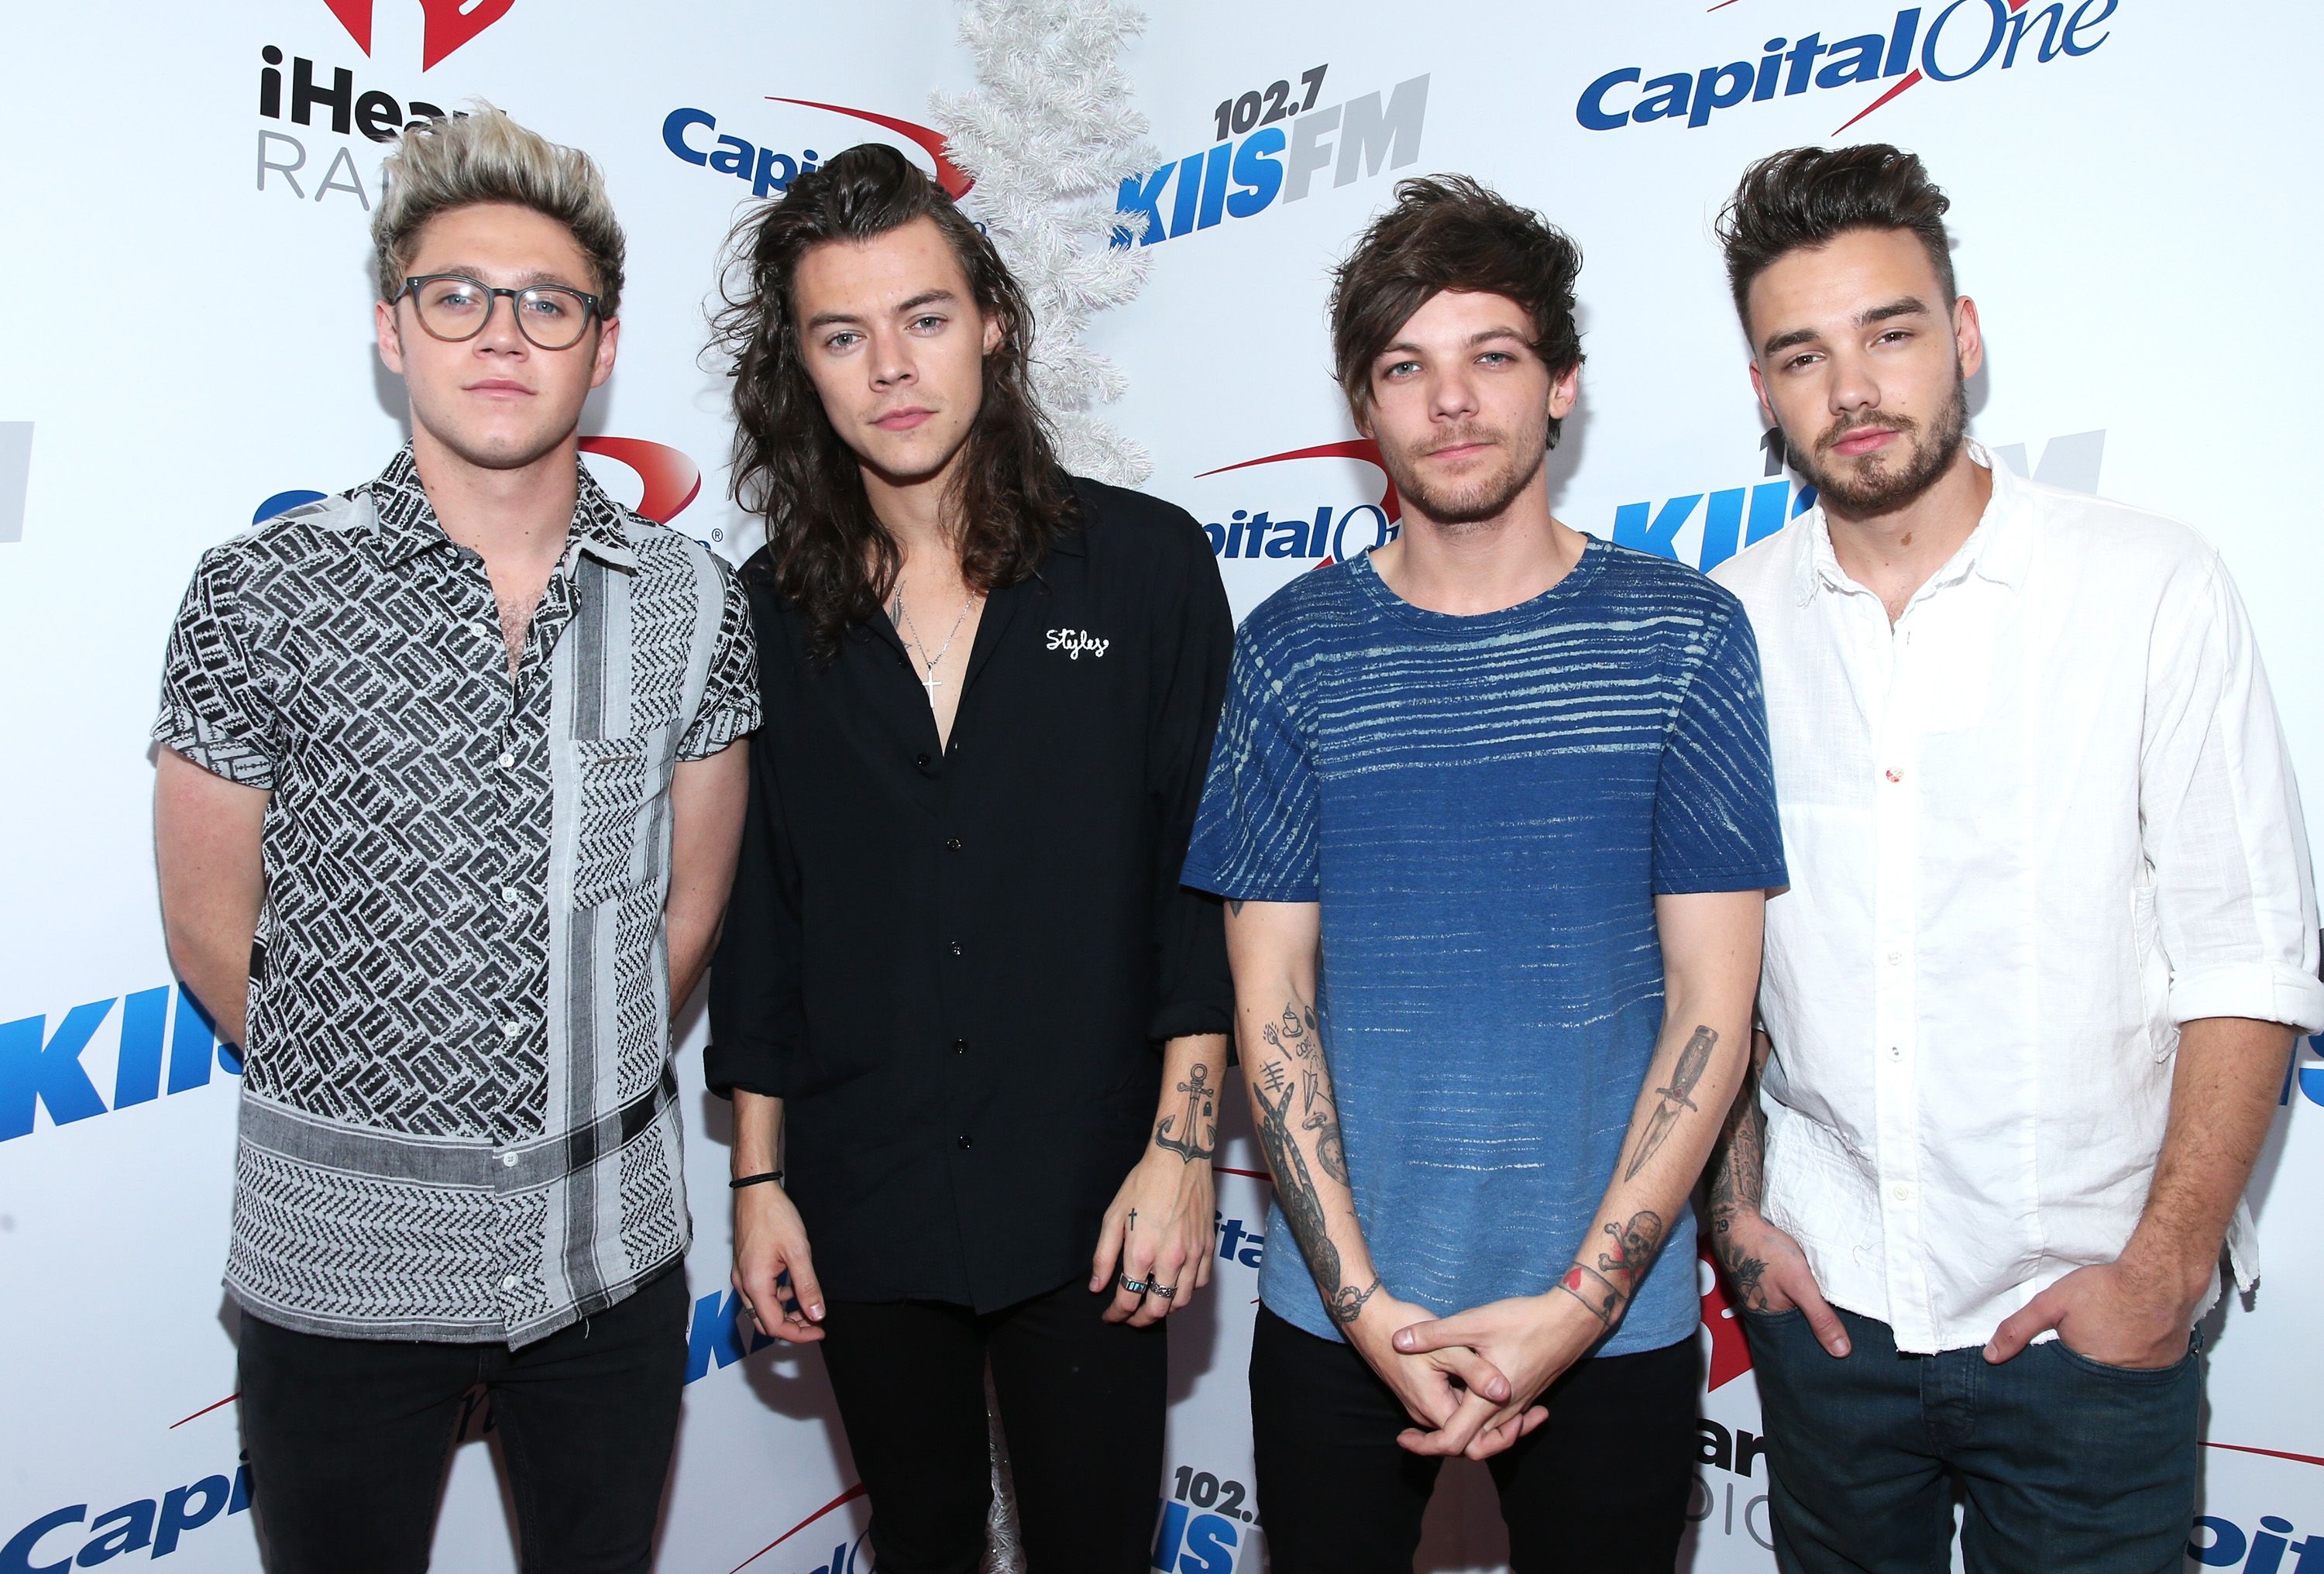 Niall Horan: One Direction reunion is 'definitely' happening